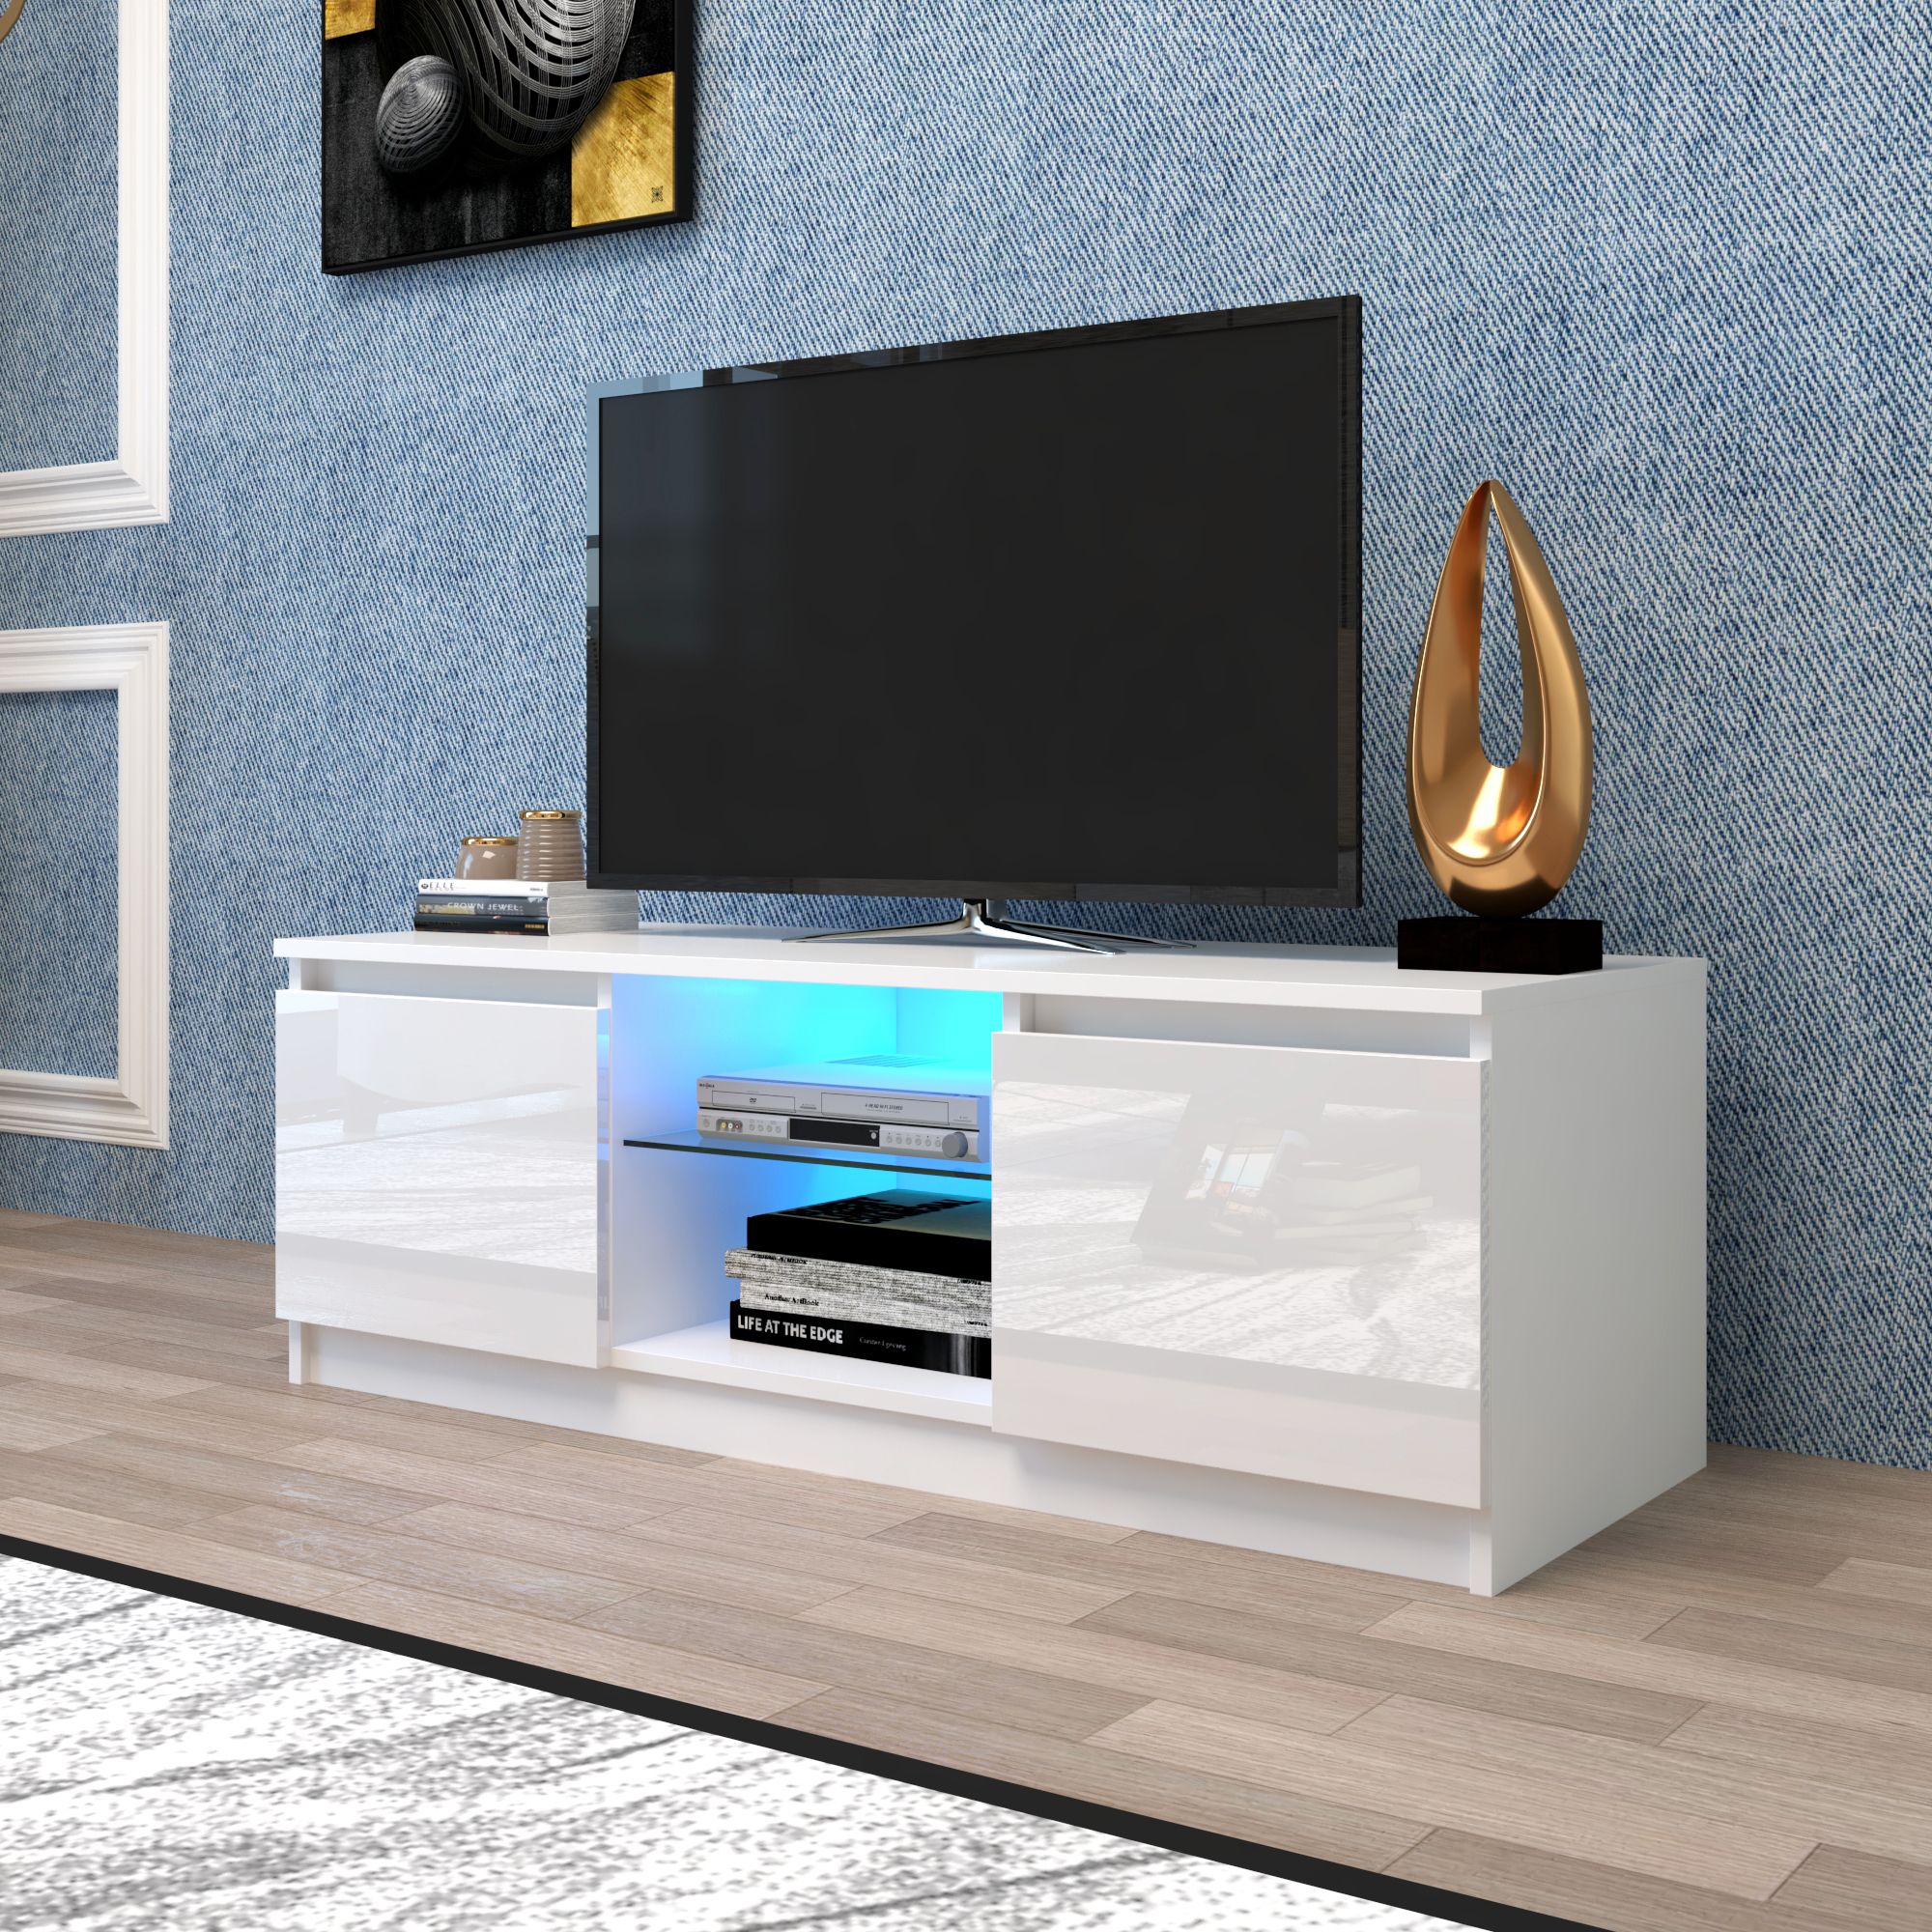 Entertainment Center For Tvs, Modern White Tv Stand With For White Corner Tv Cabinets (View 15 of 15)